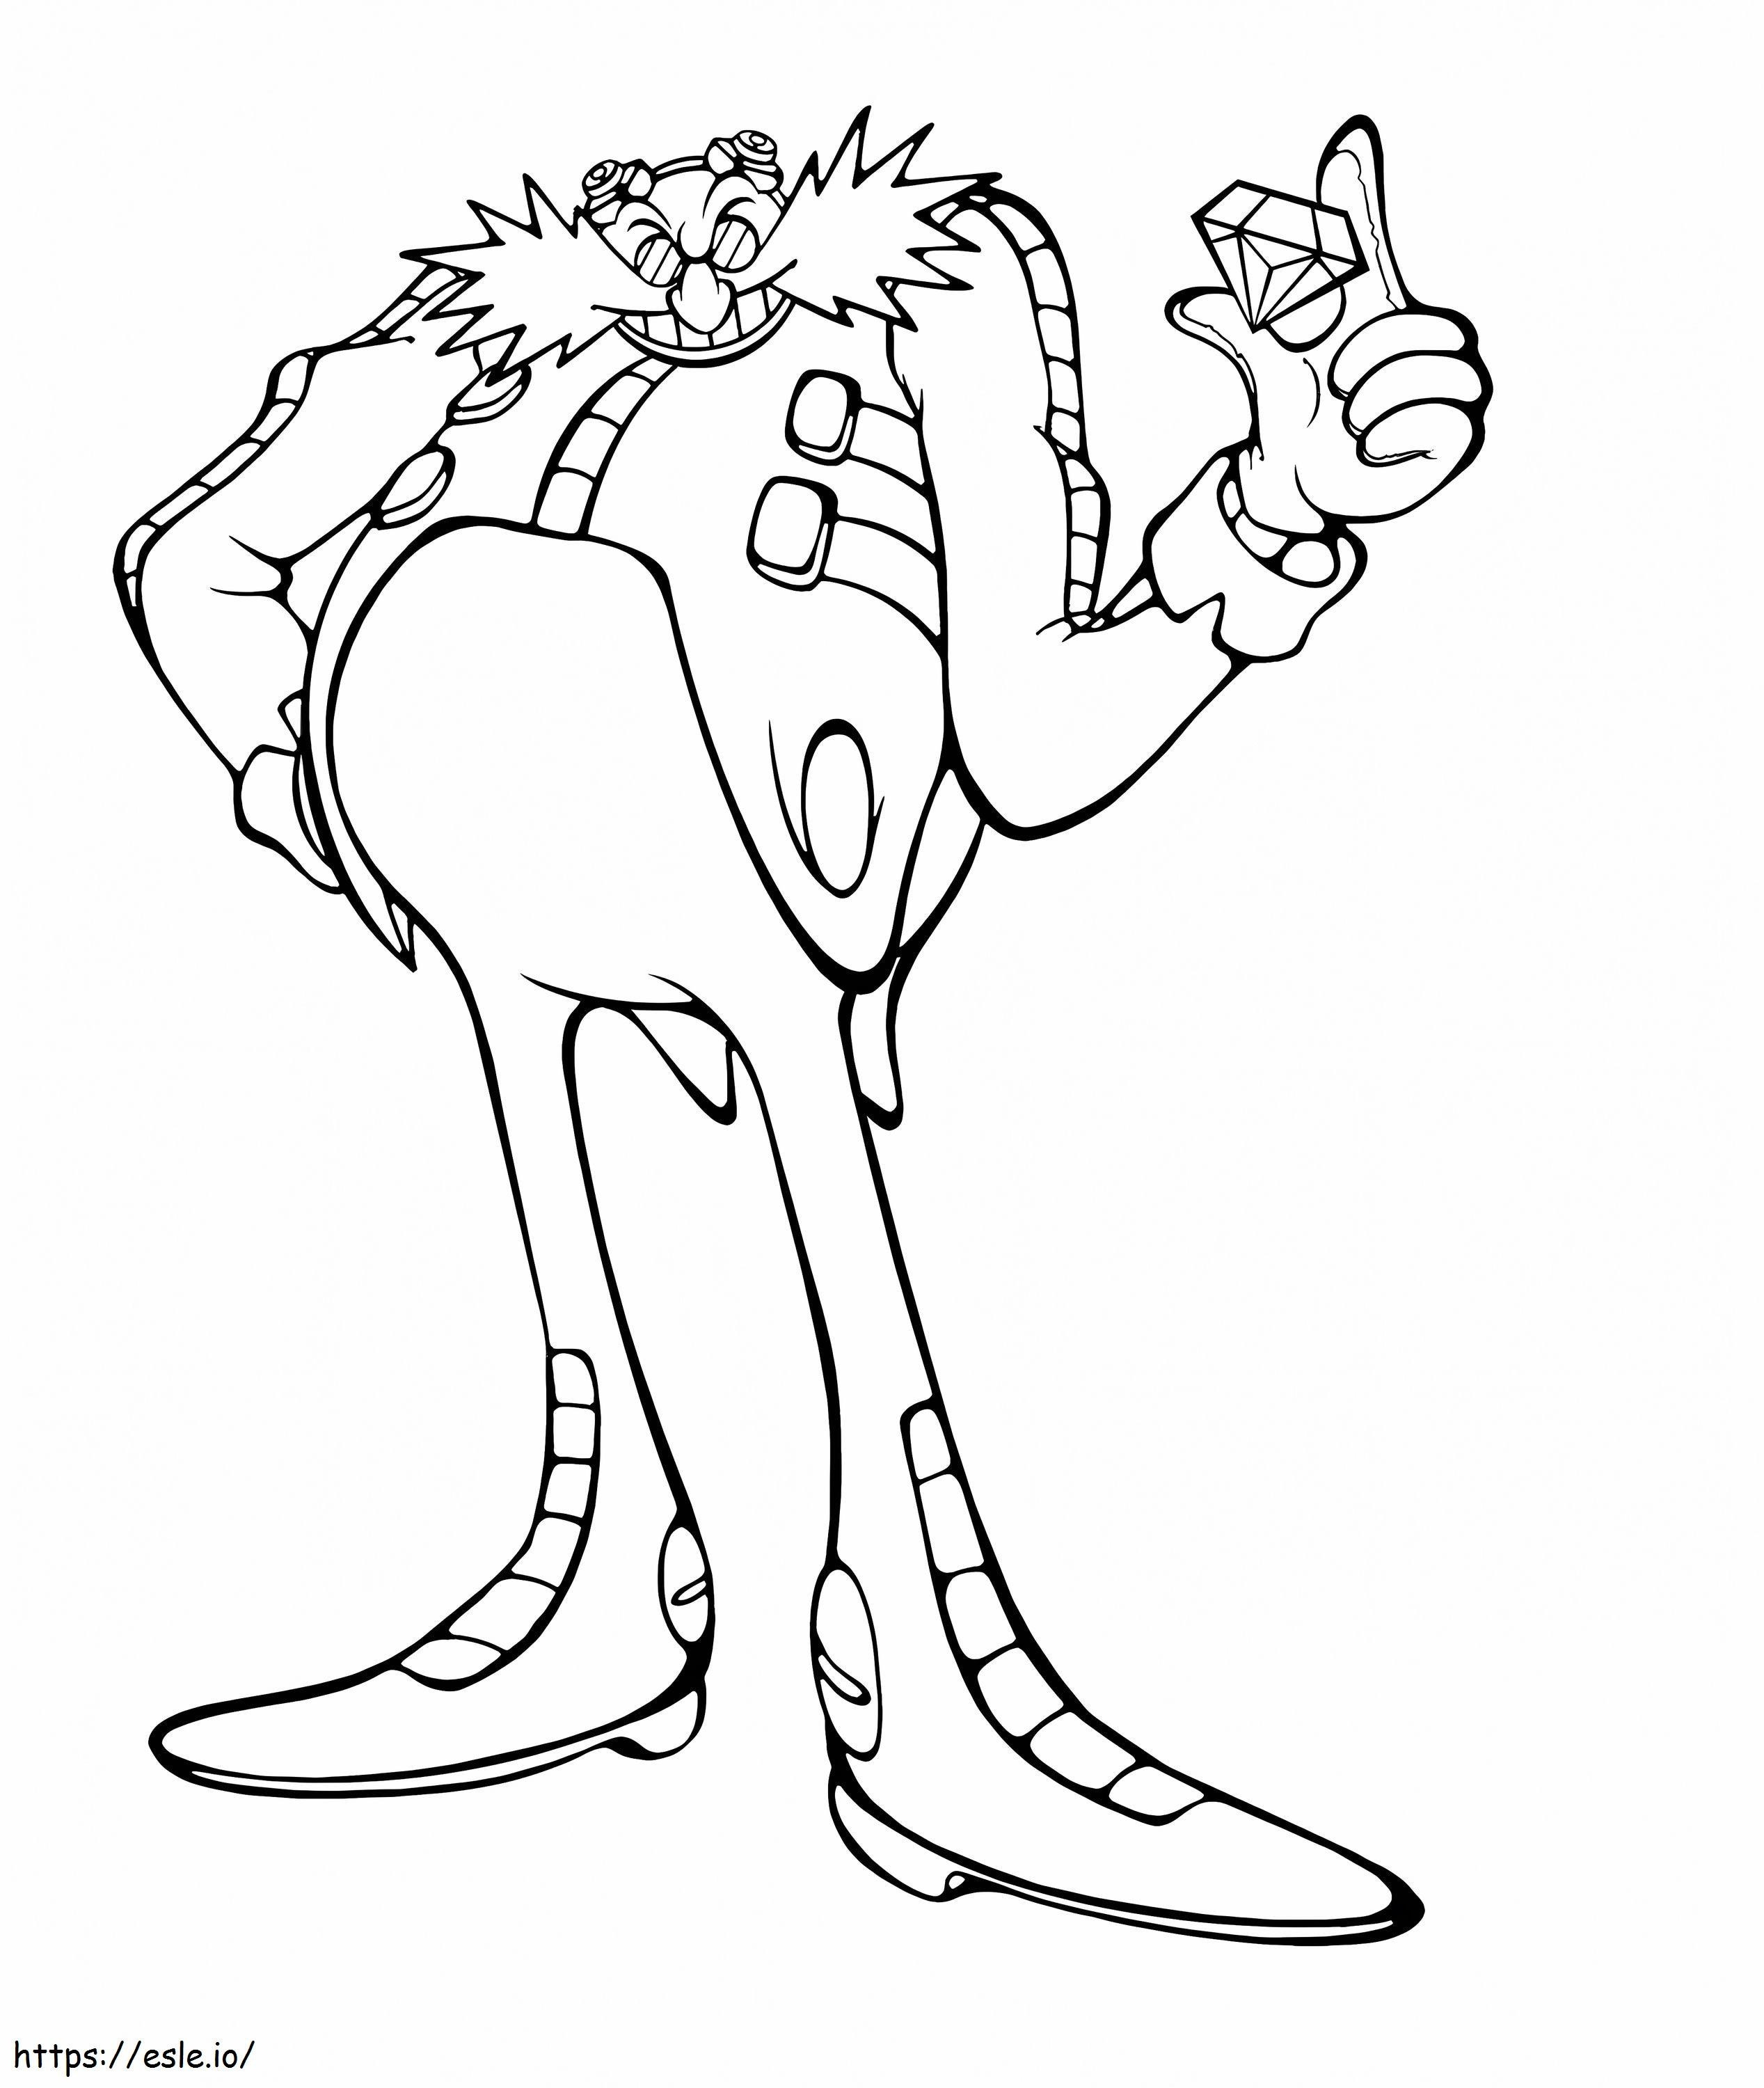 Doctor Eggman With Diamonds coloring page